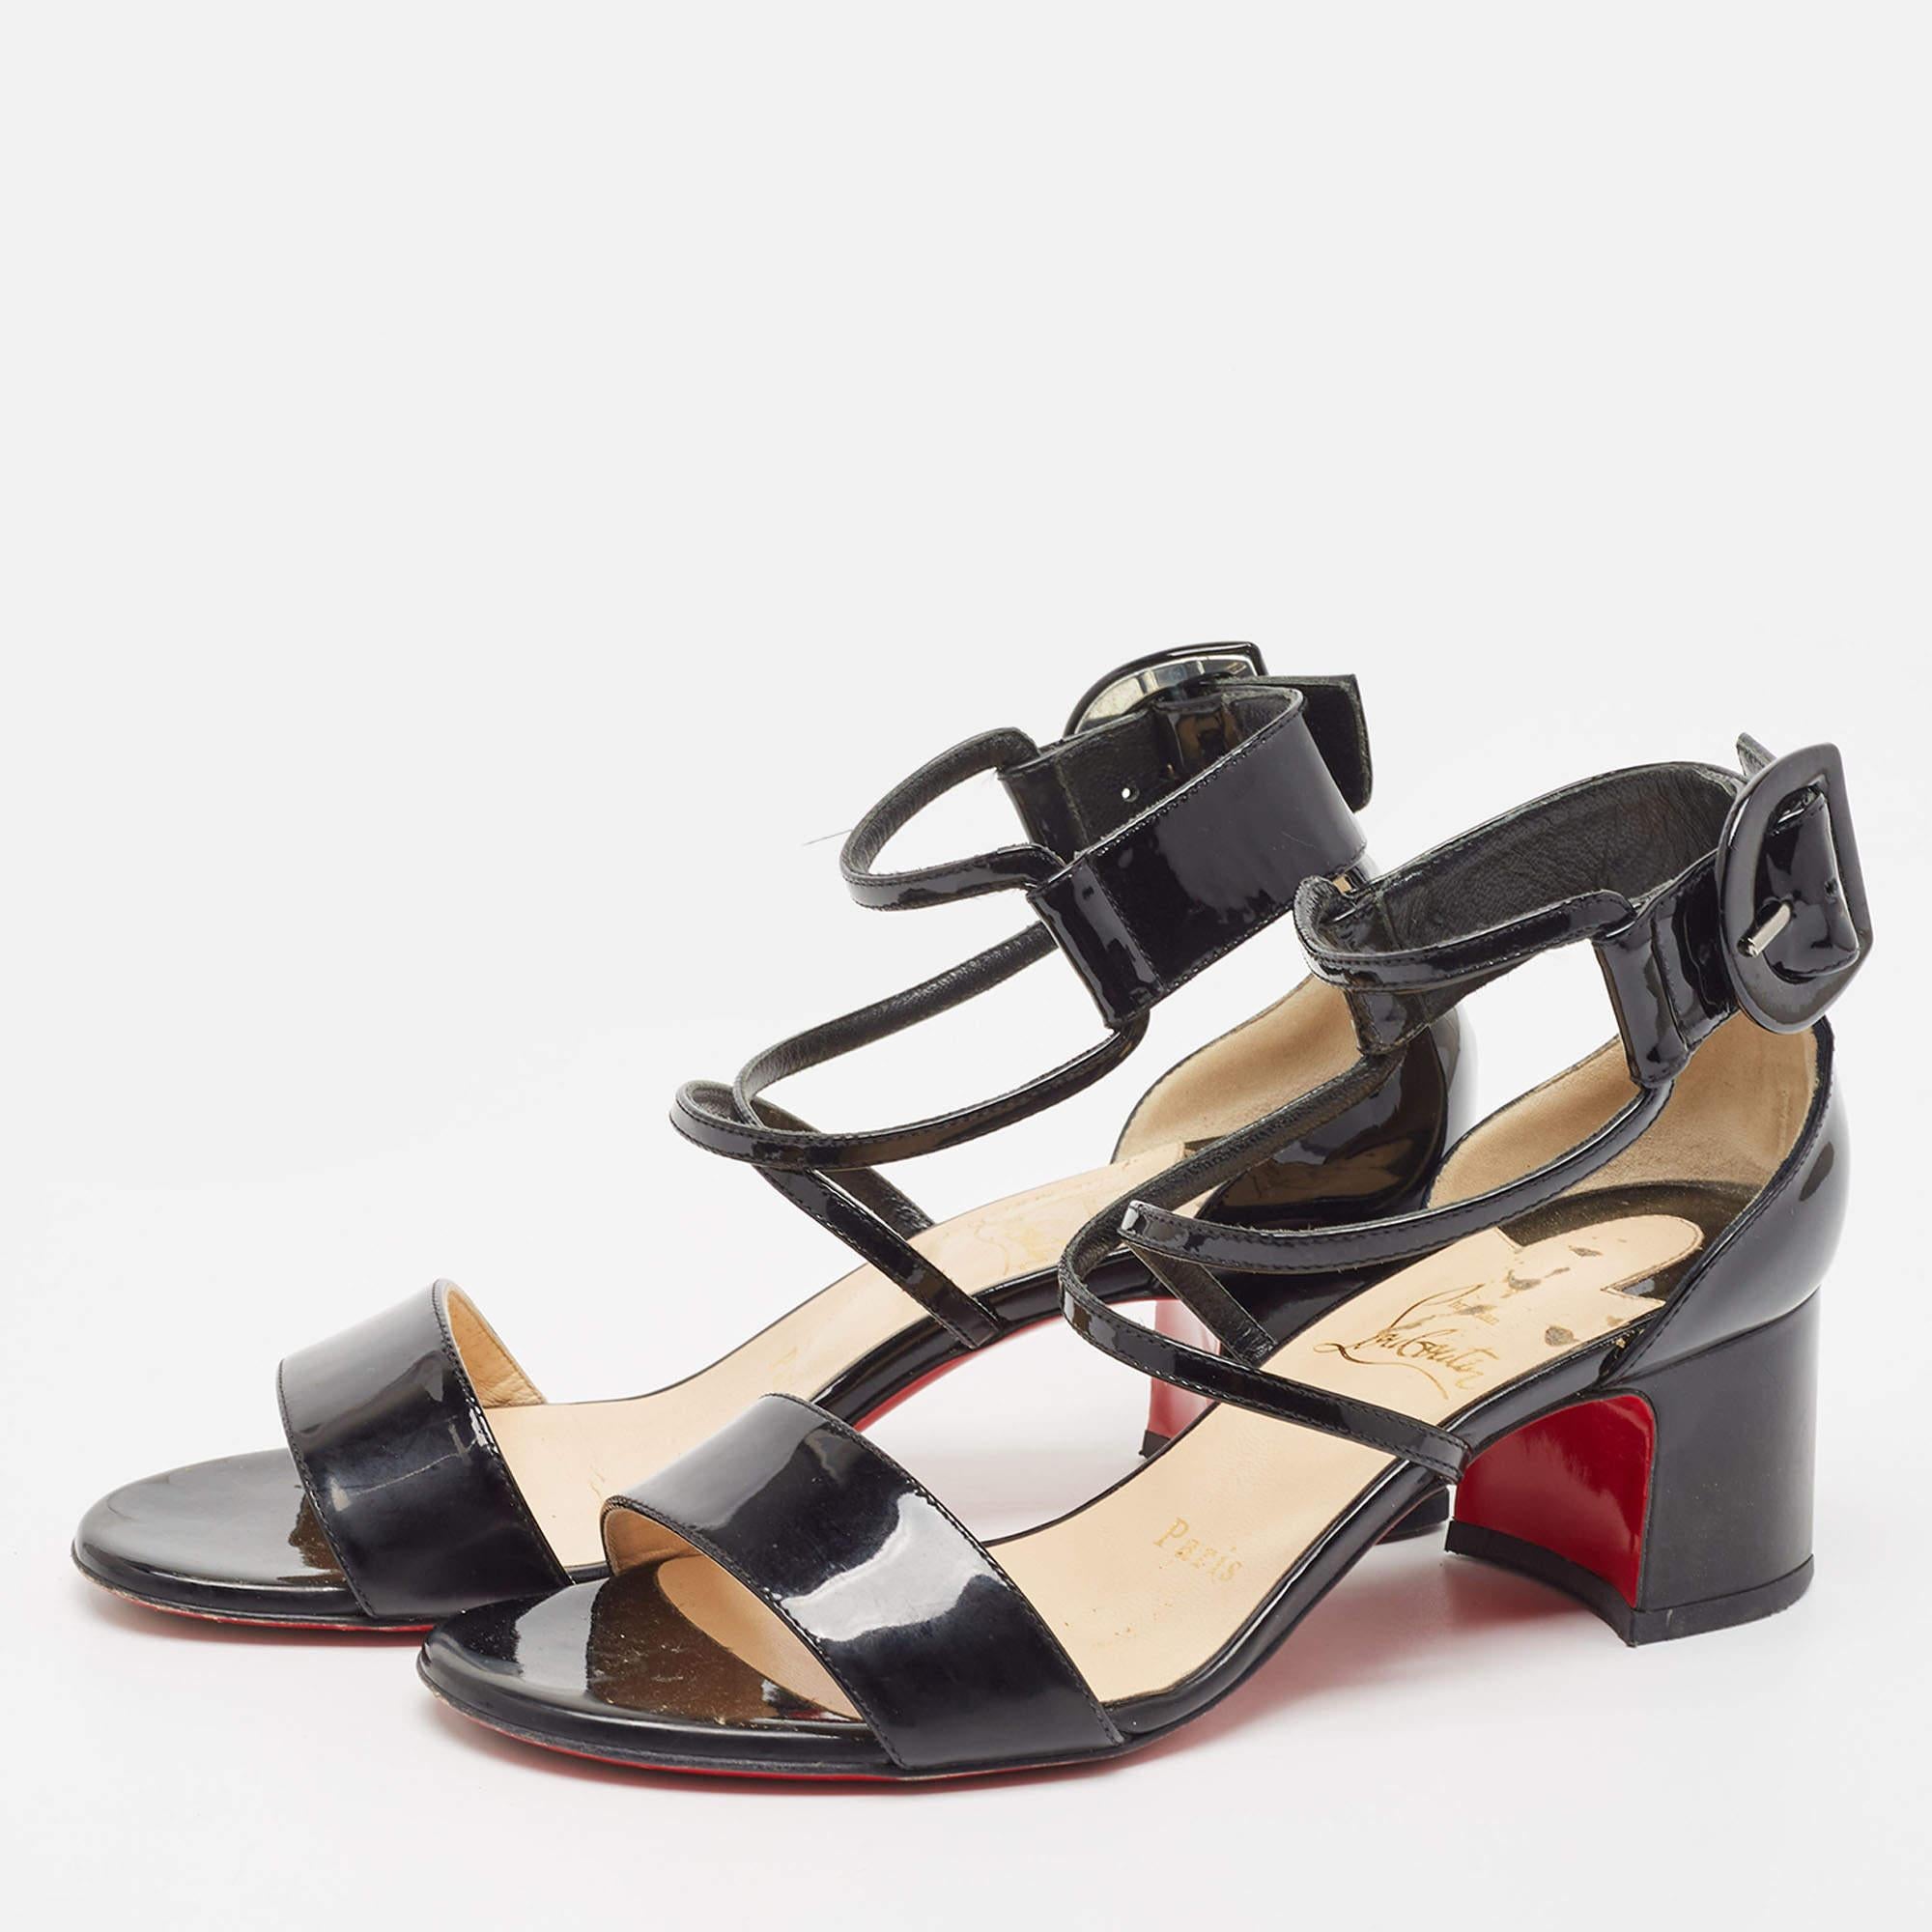 Christian Louboutin Black Patent Strappy Block Heel Sandals Size 35.5 For Sale 1